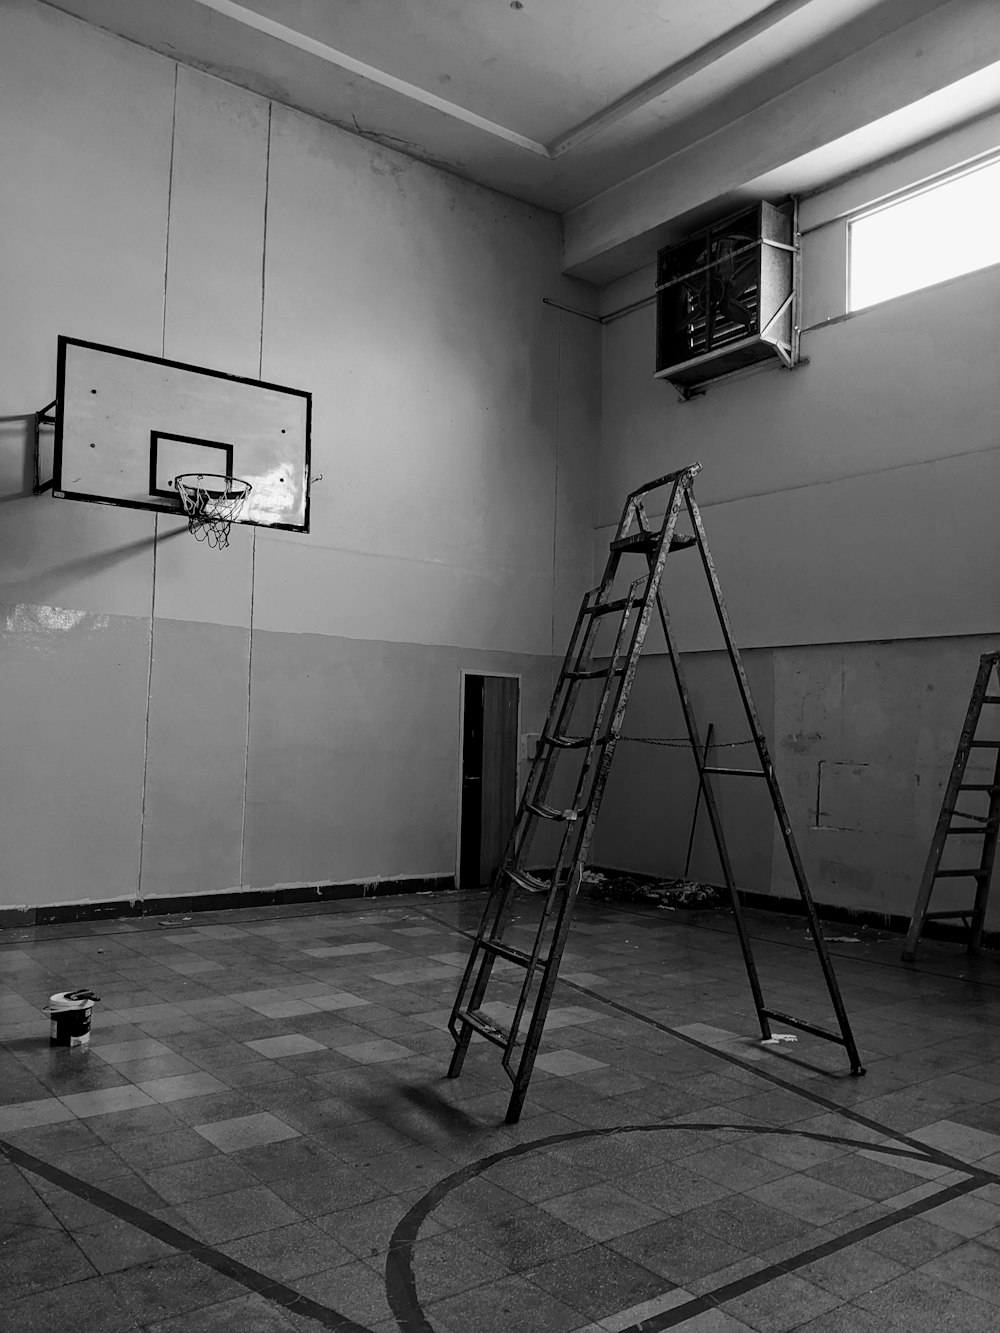 a basketball court with ladders and a basketball hoop